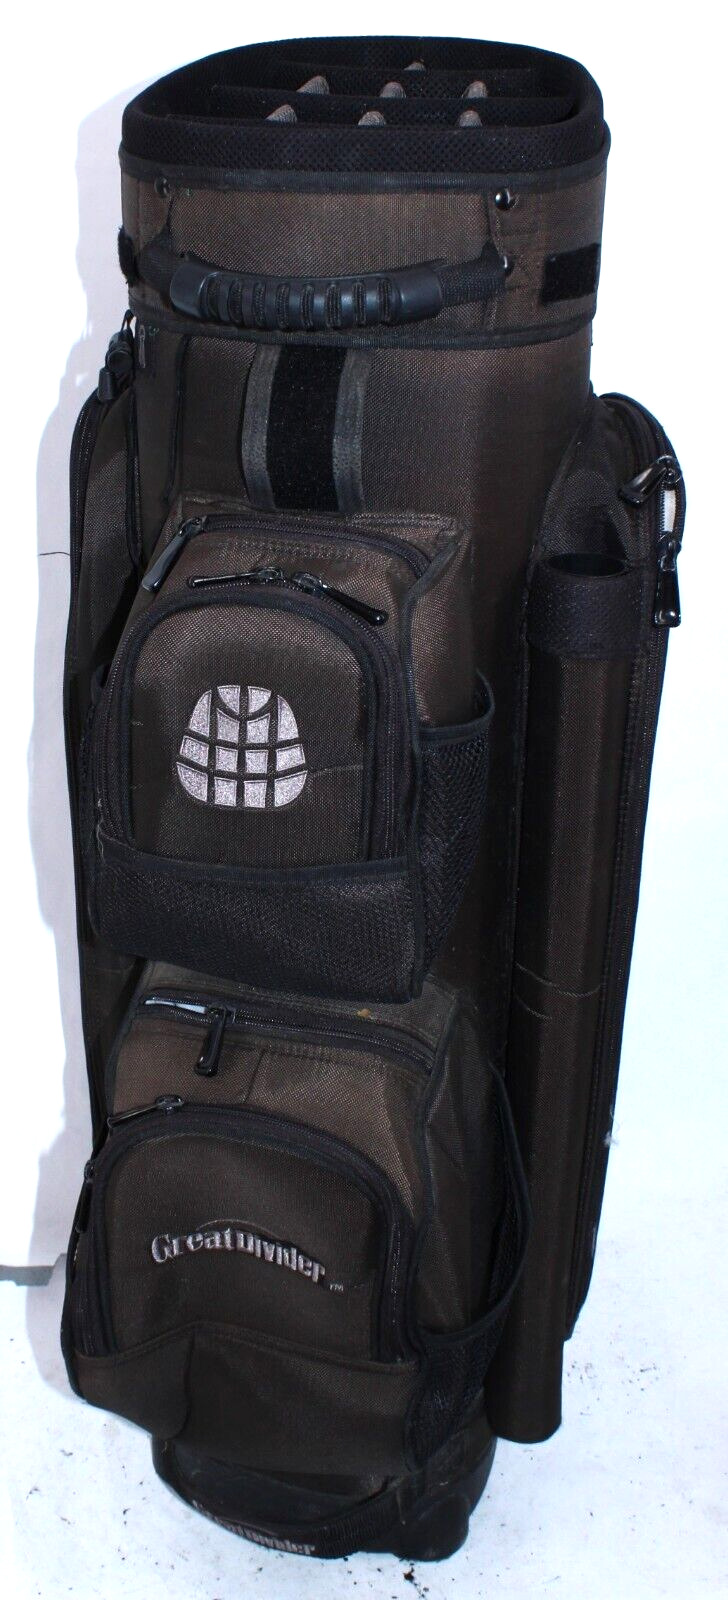 Average 8.0 Great Divider™ Pro 9.0 Cart Bag with 14-Way-Top